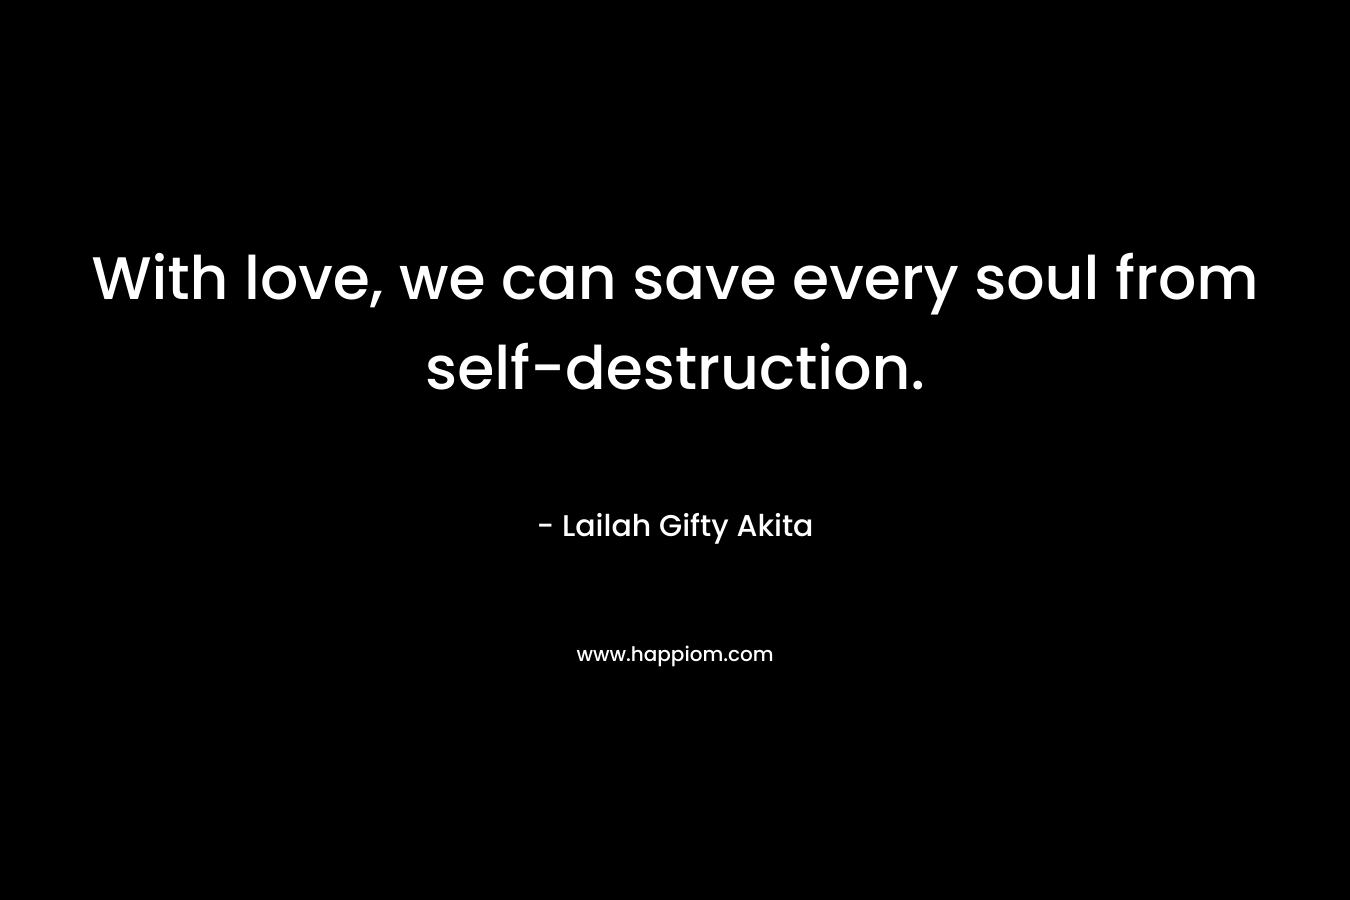 With love, we can save every soul from self-destruction.